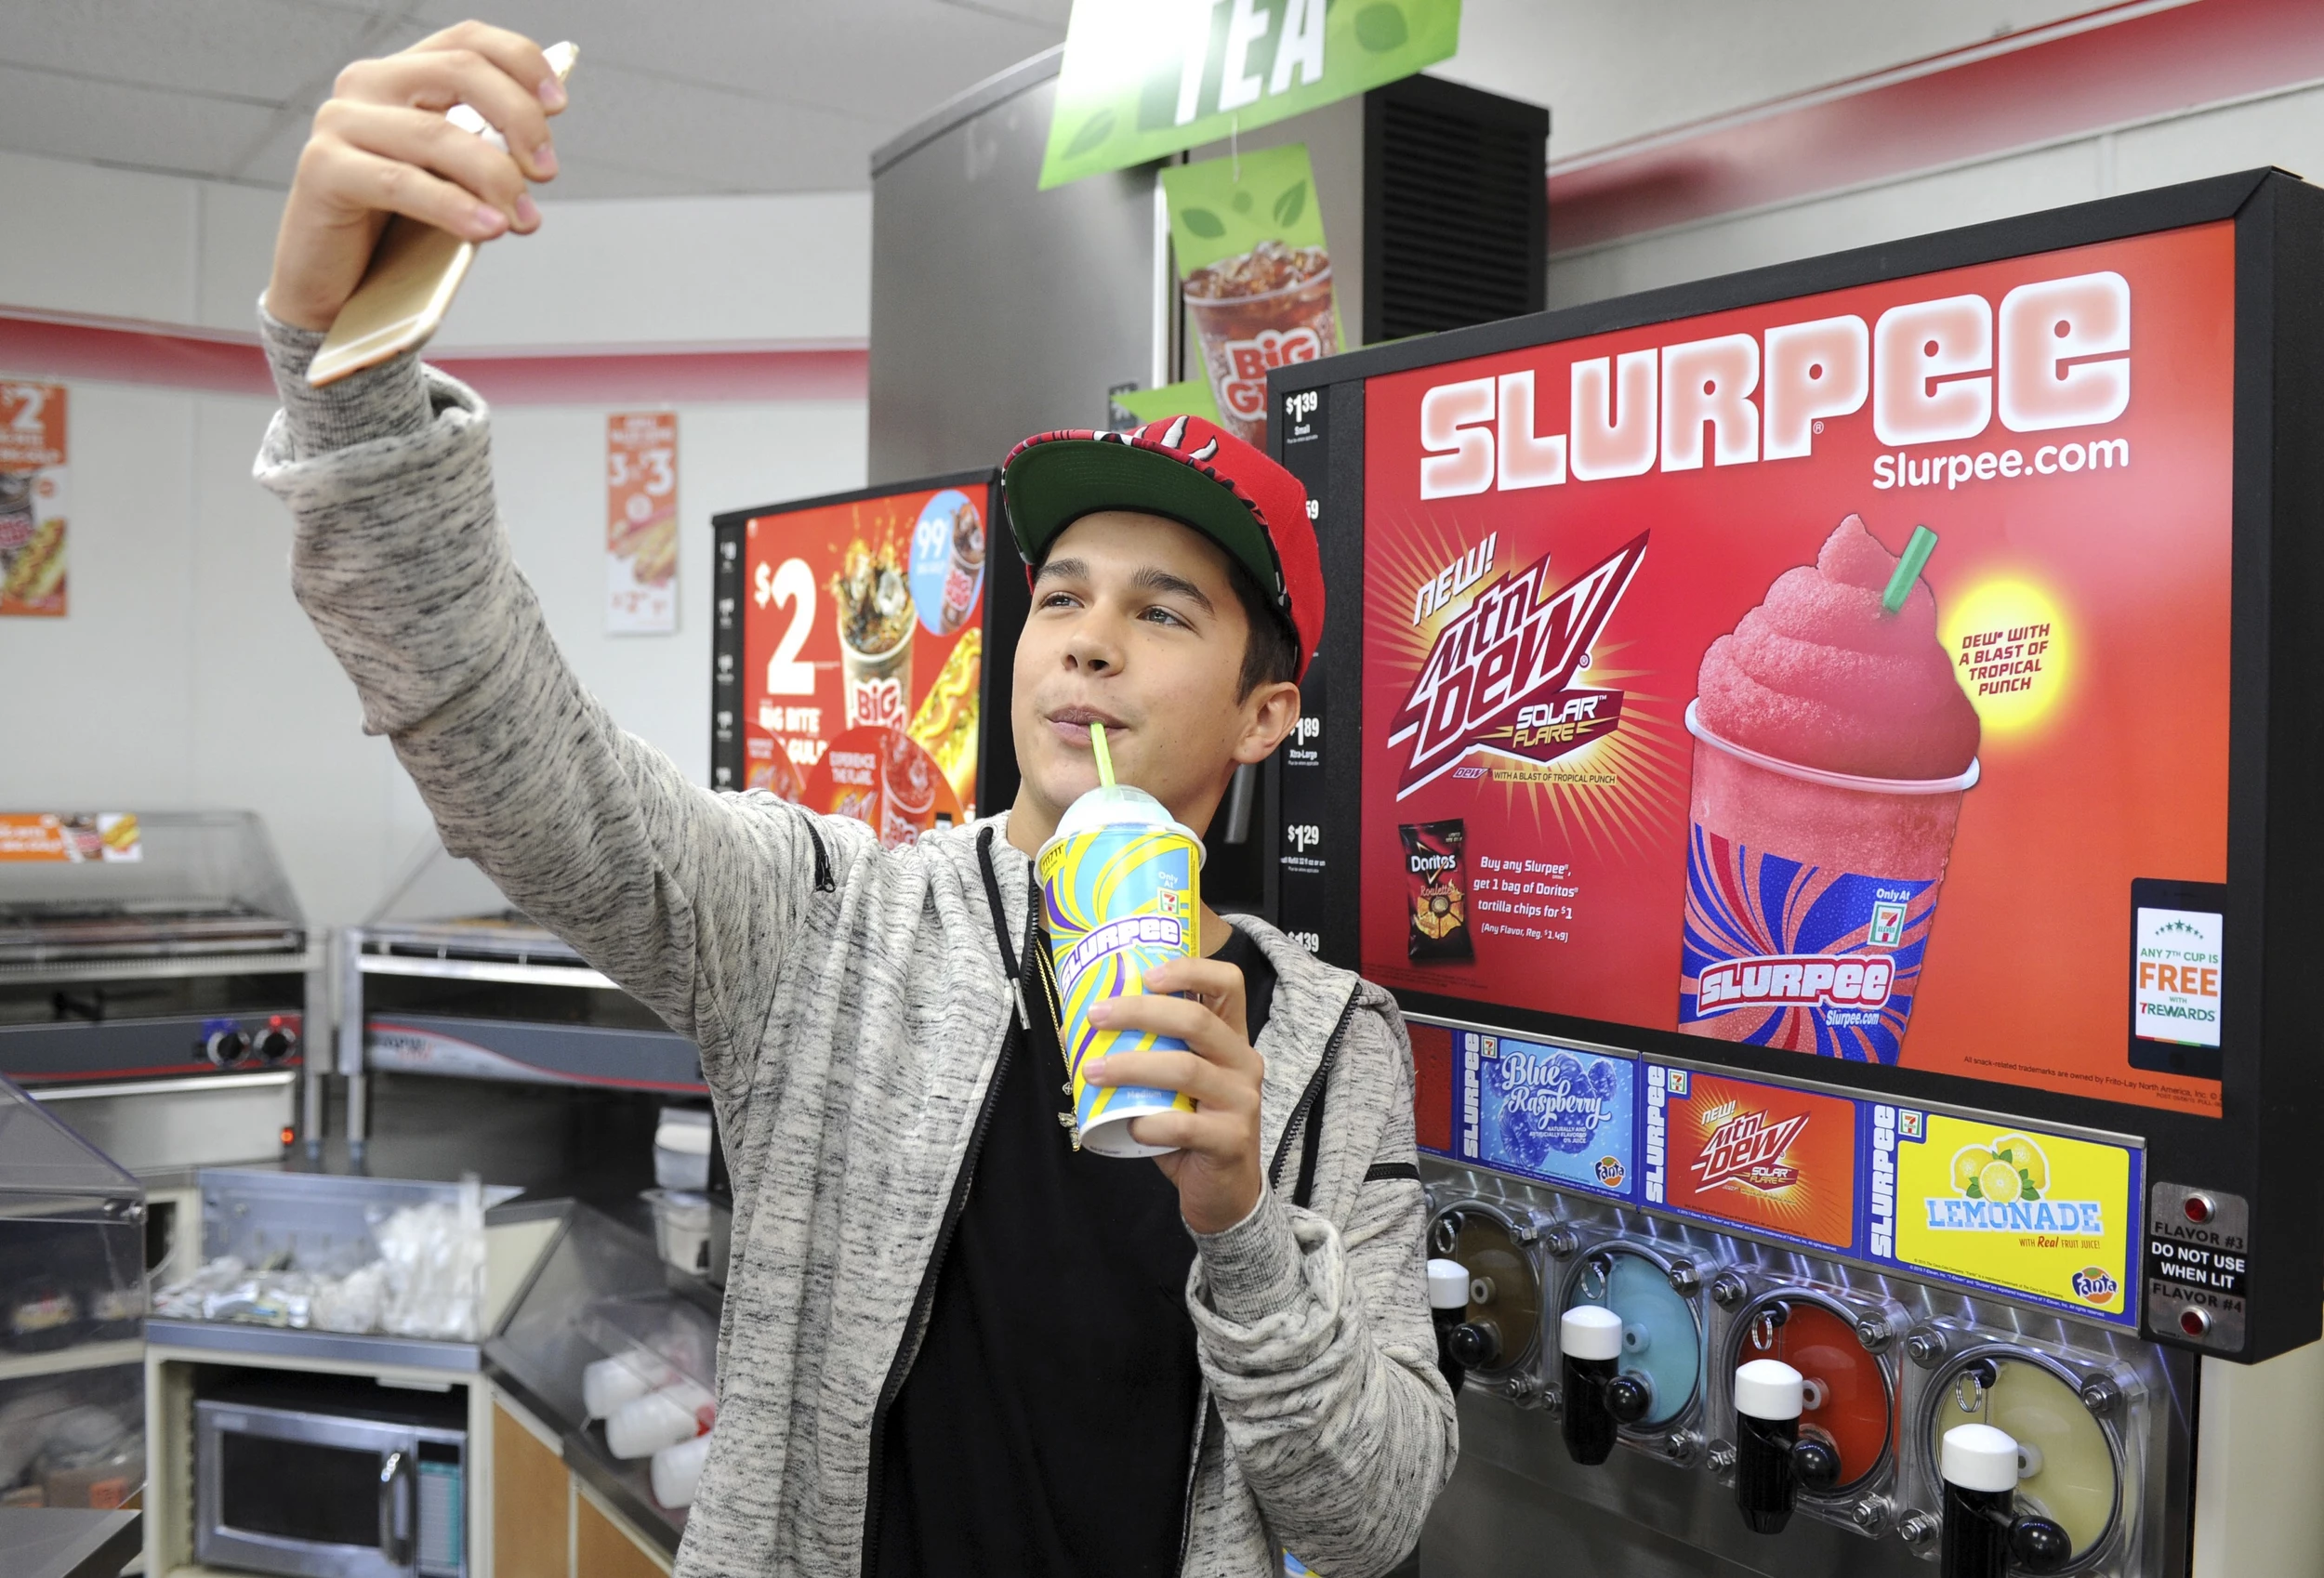 7 Eleven Releases Slurpee Flavored Donuts 0024